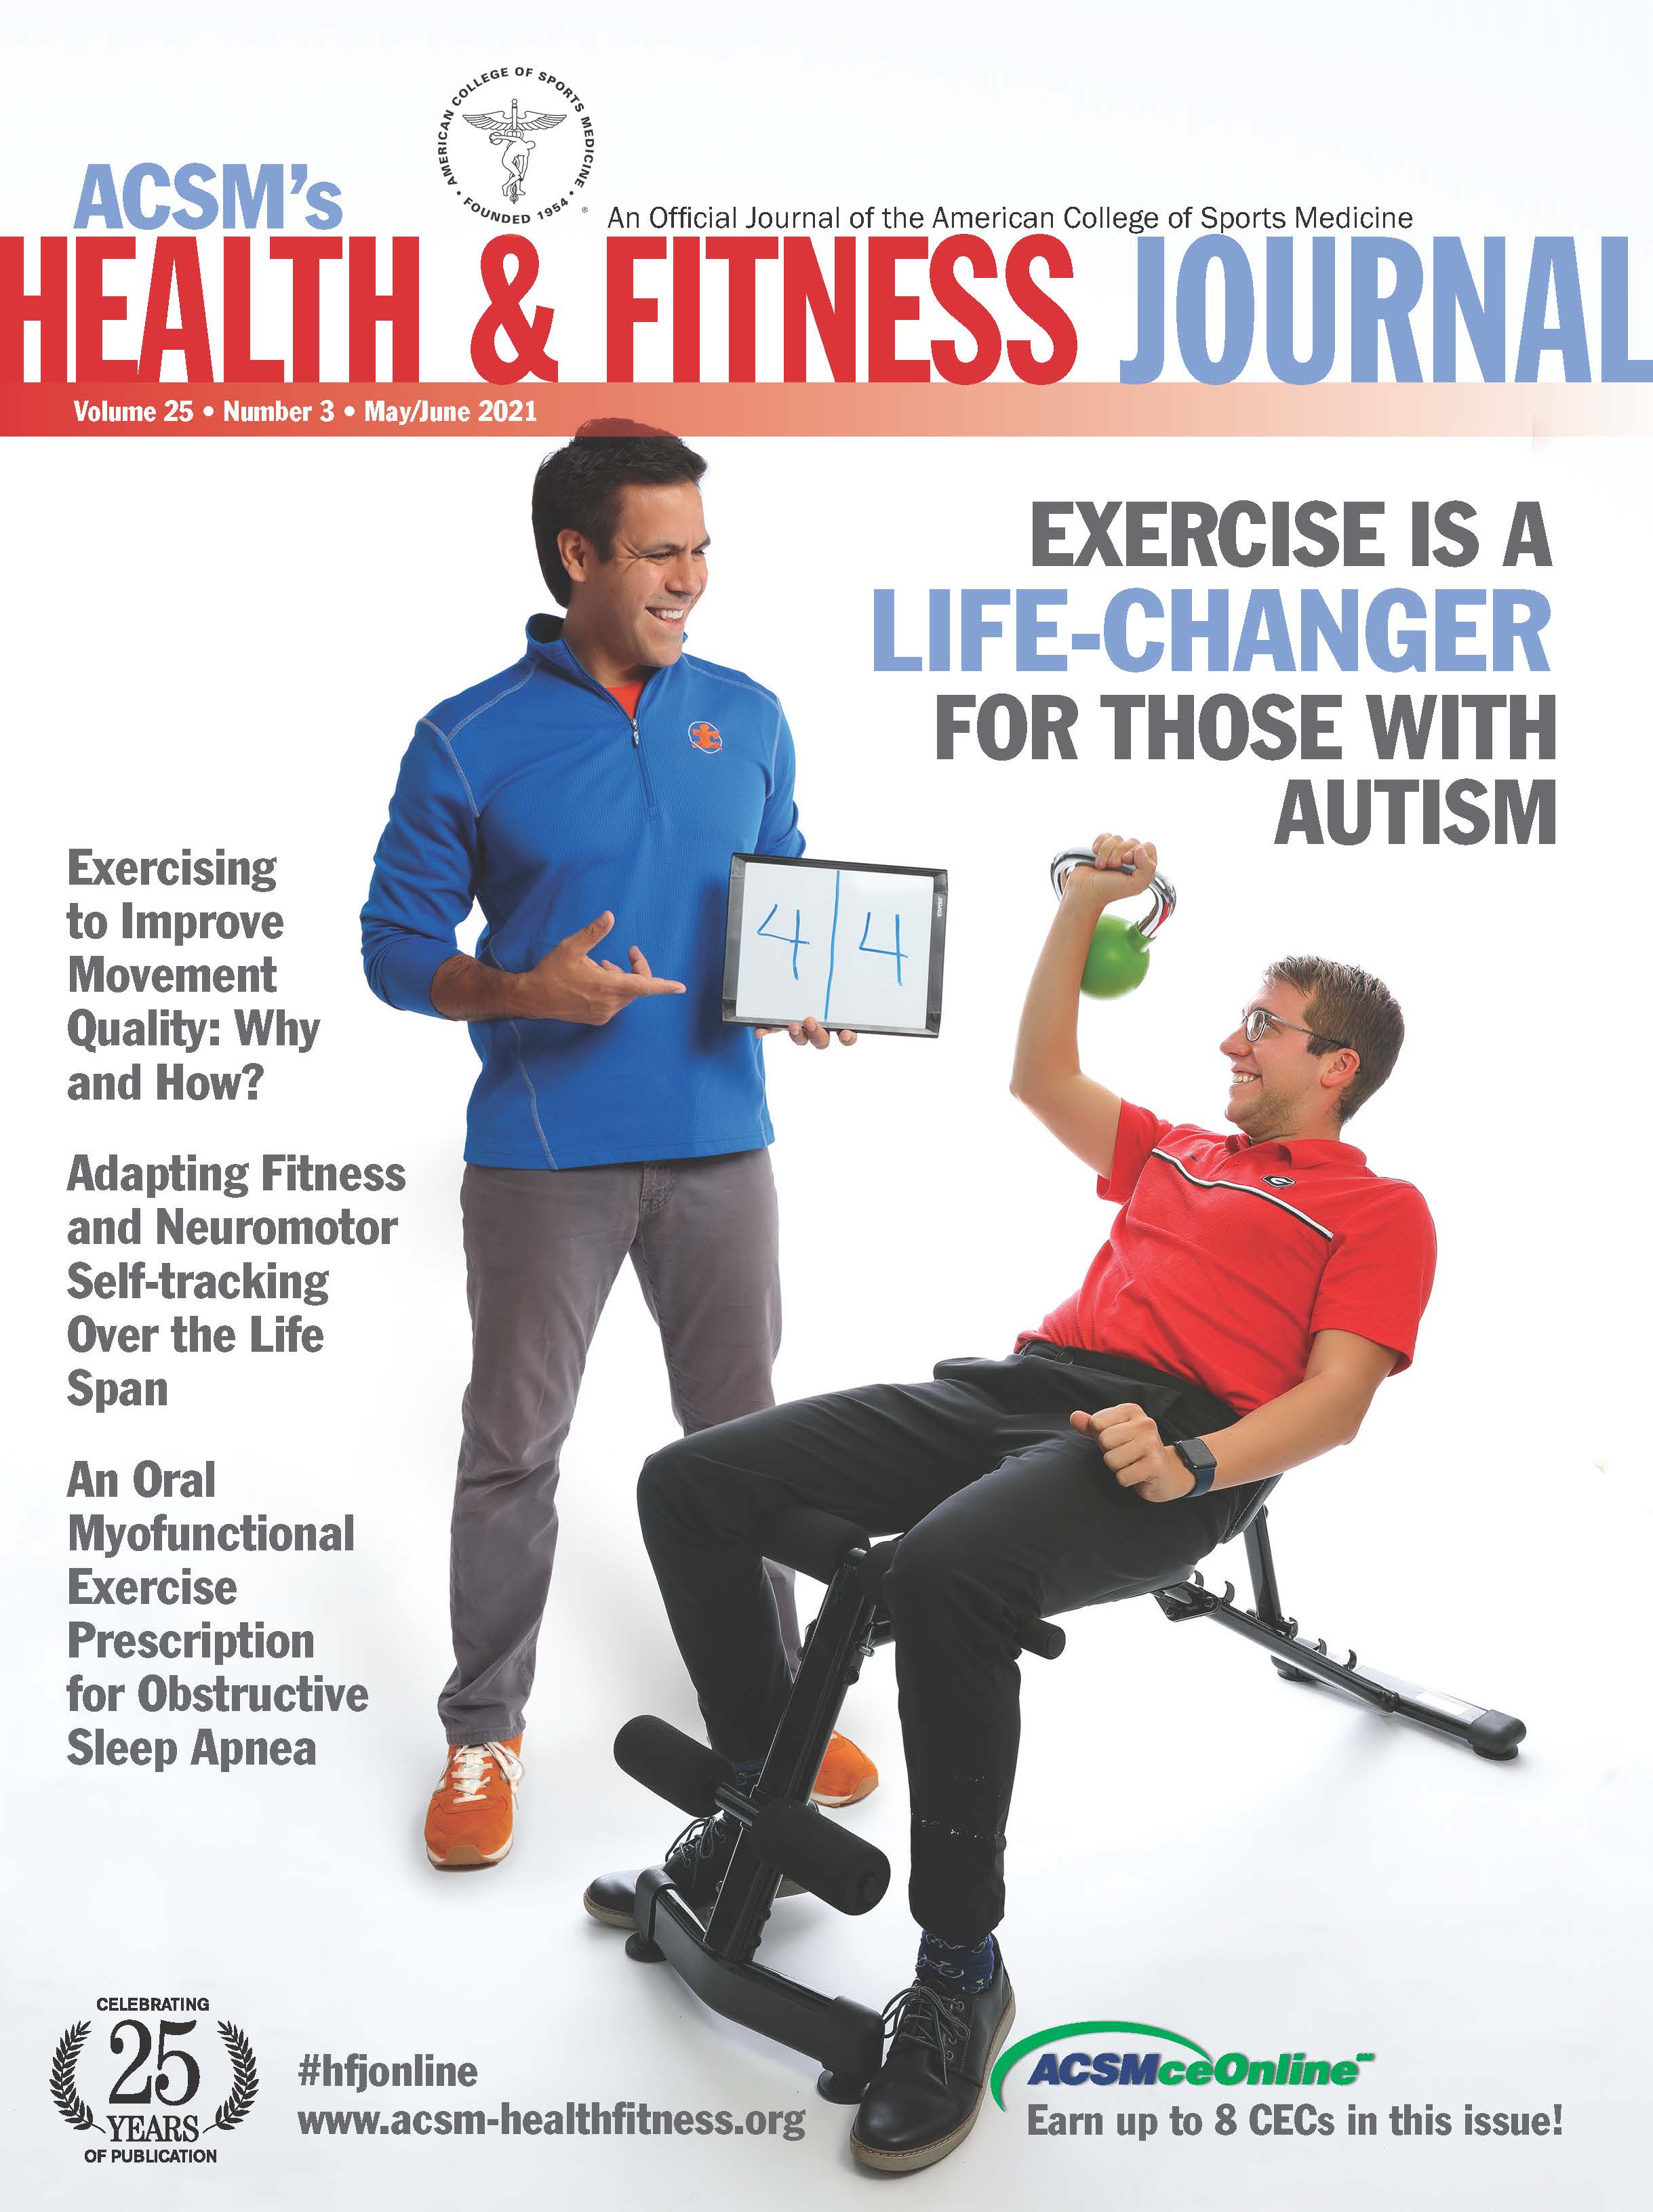 ACSM's Health & Fitness Journal®: May - June 2021 CEC COURSE